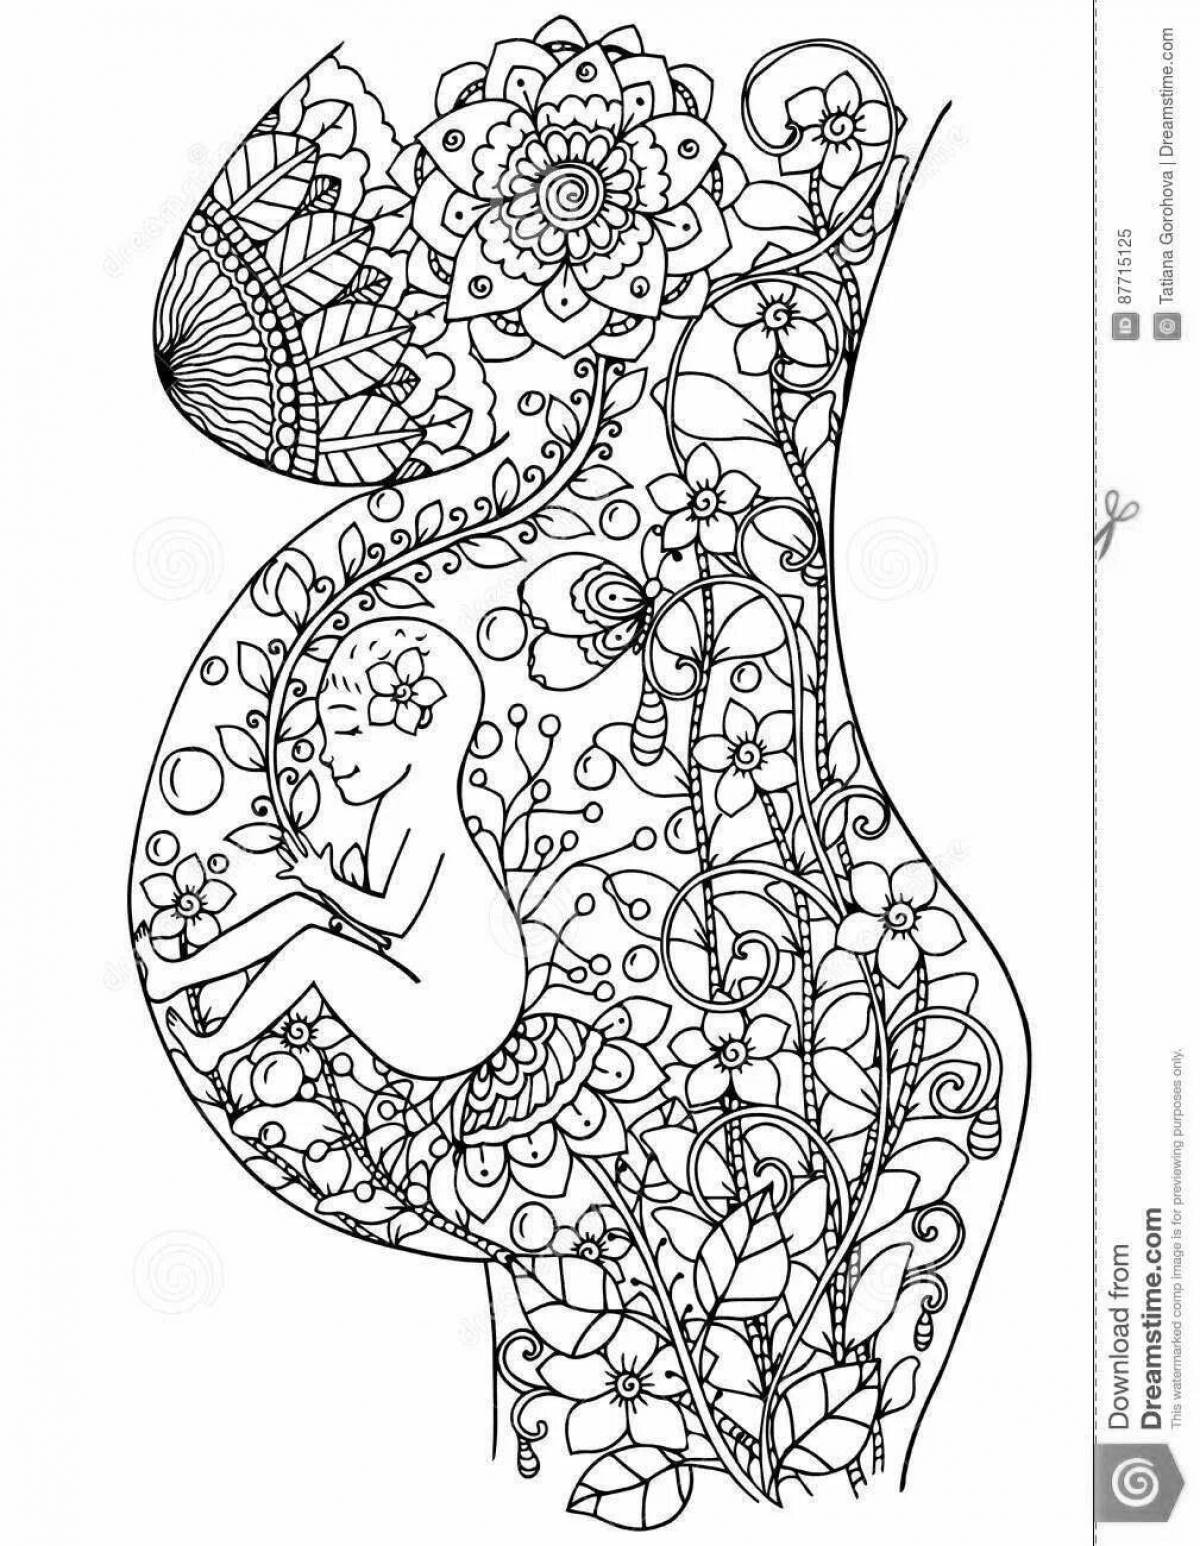 Animation of pregnancy coloring page